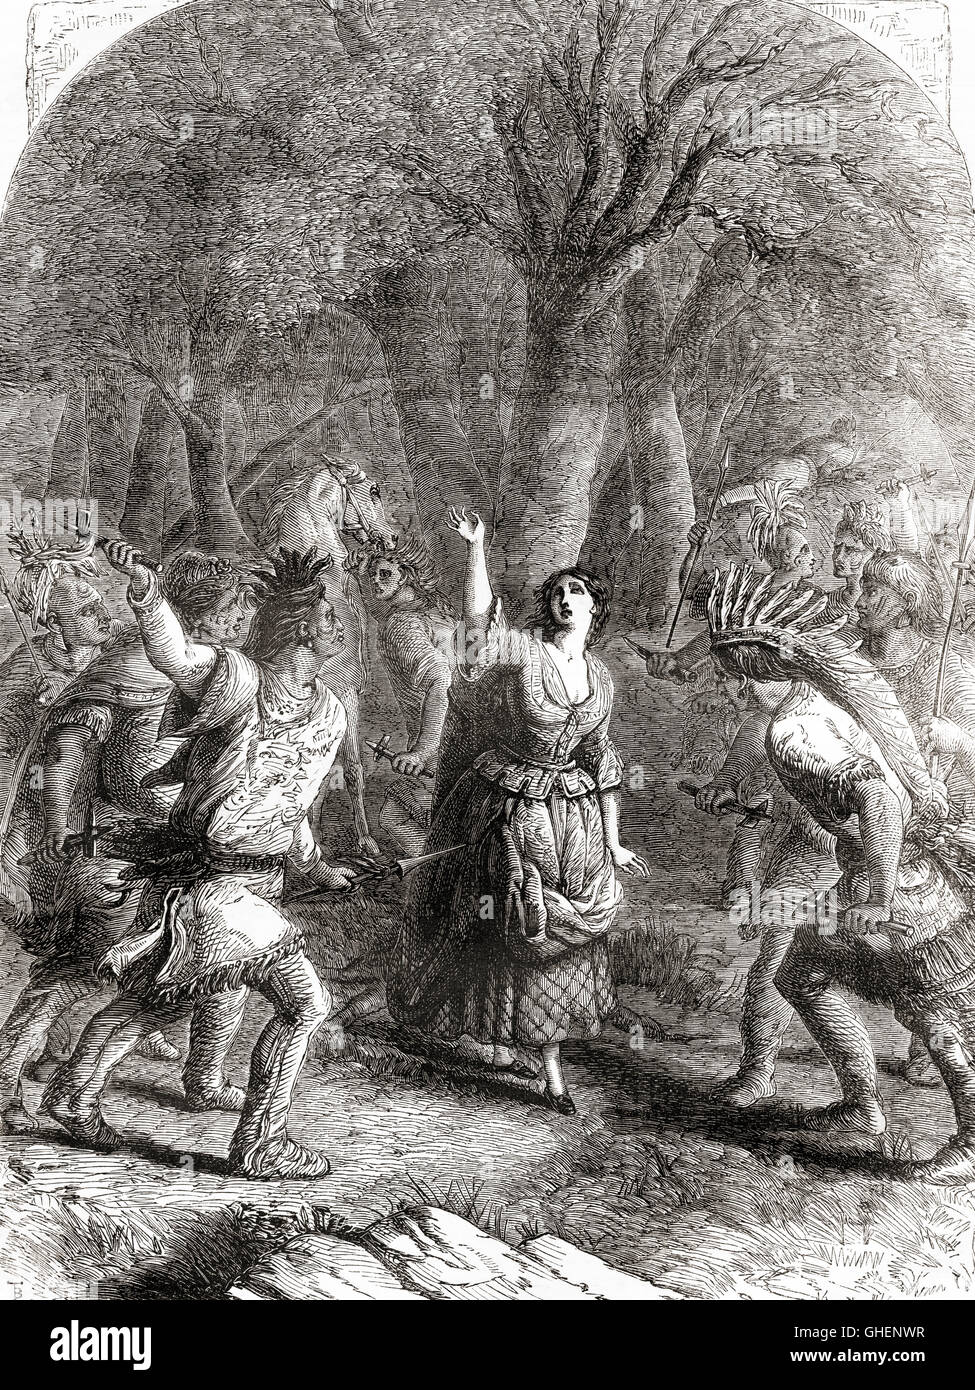 The abduction and later murder of Jennie aka Jane McCrea by Indians in 1777 during the American Revolutinary War. Jane McCrea, also spelled McCrae or MacCrae, 1752 – 1777. Stock Photo